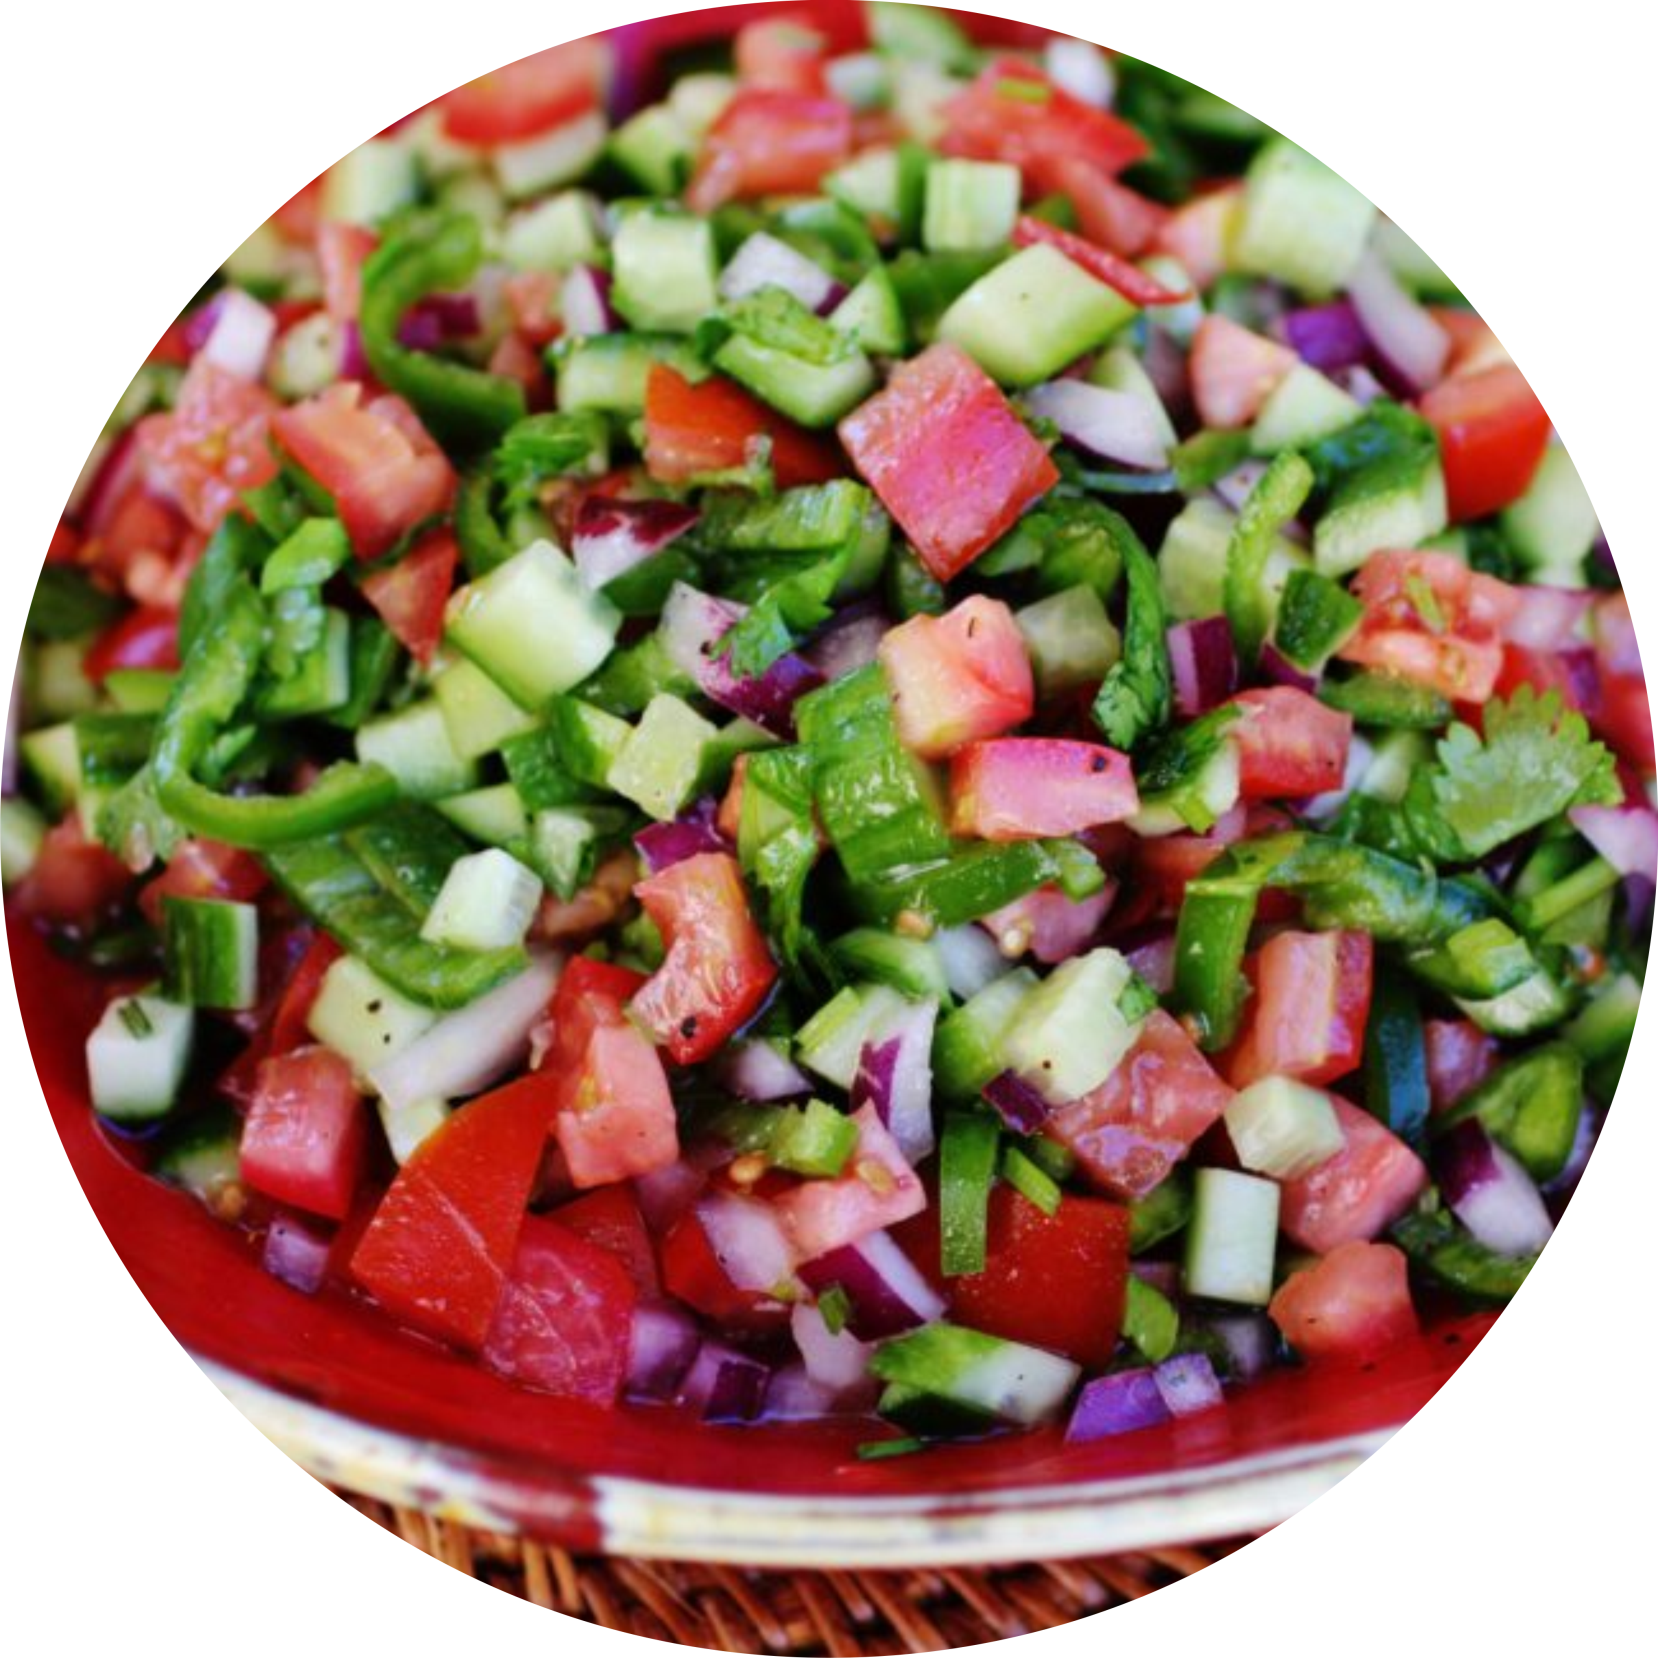 A Bowl Of Chopped Vegetables